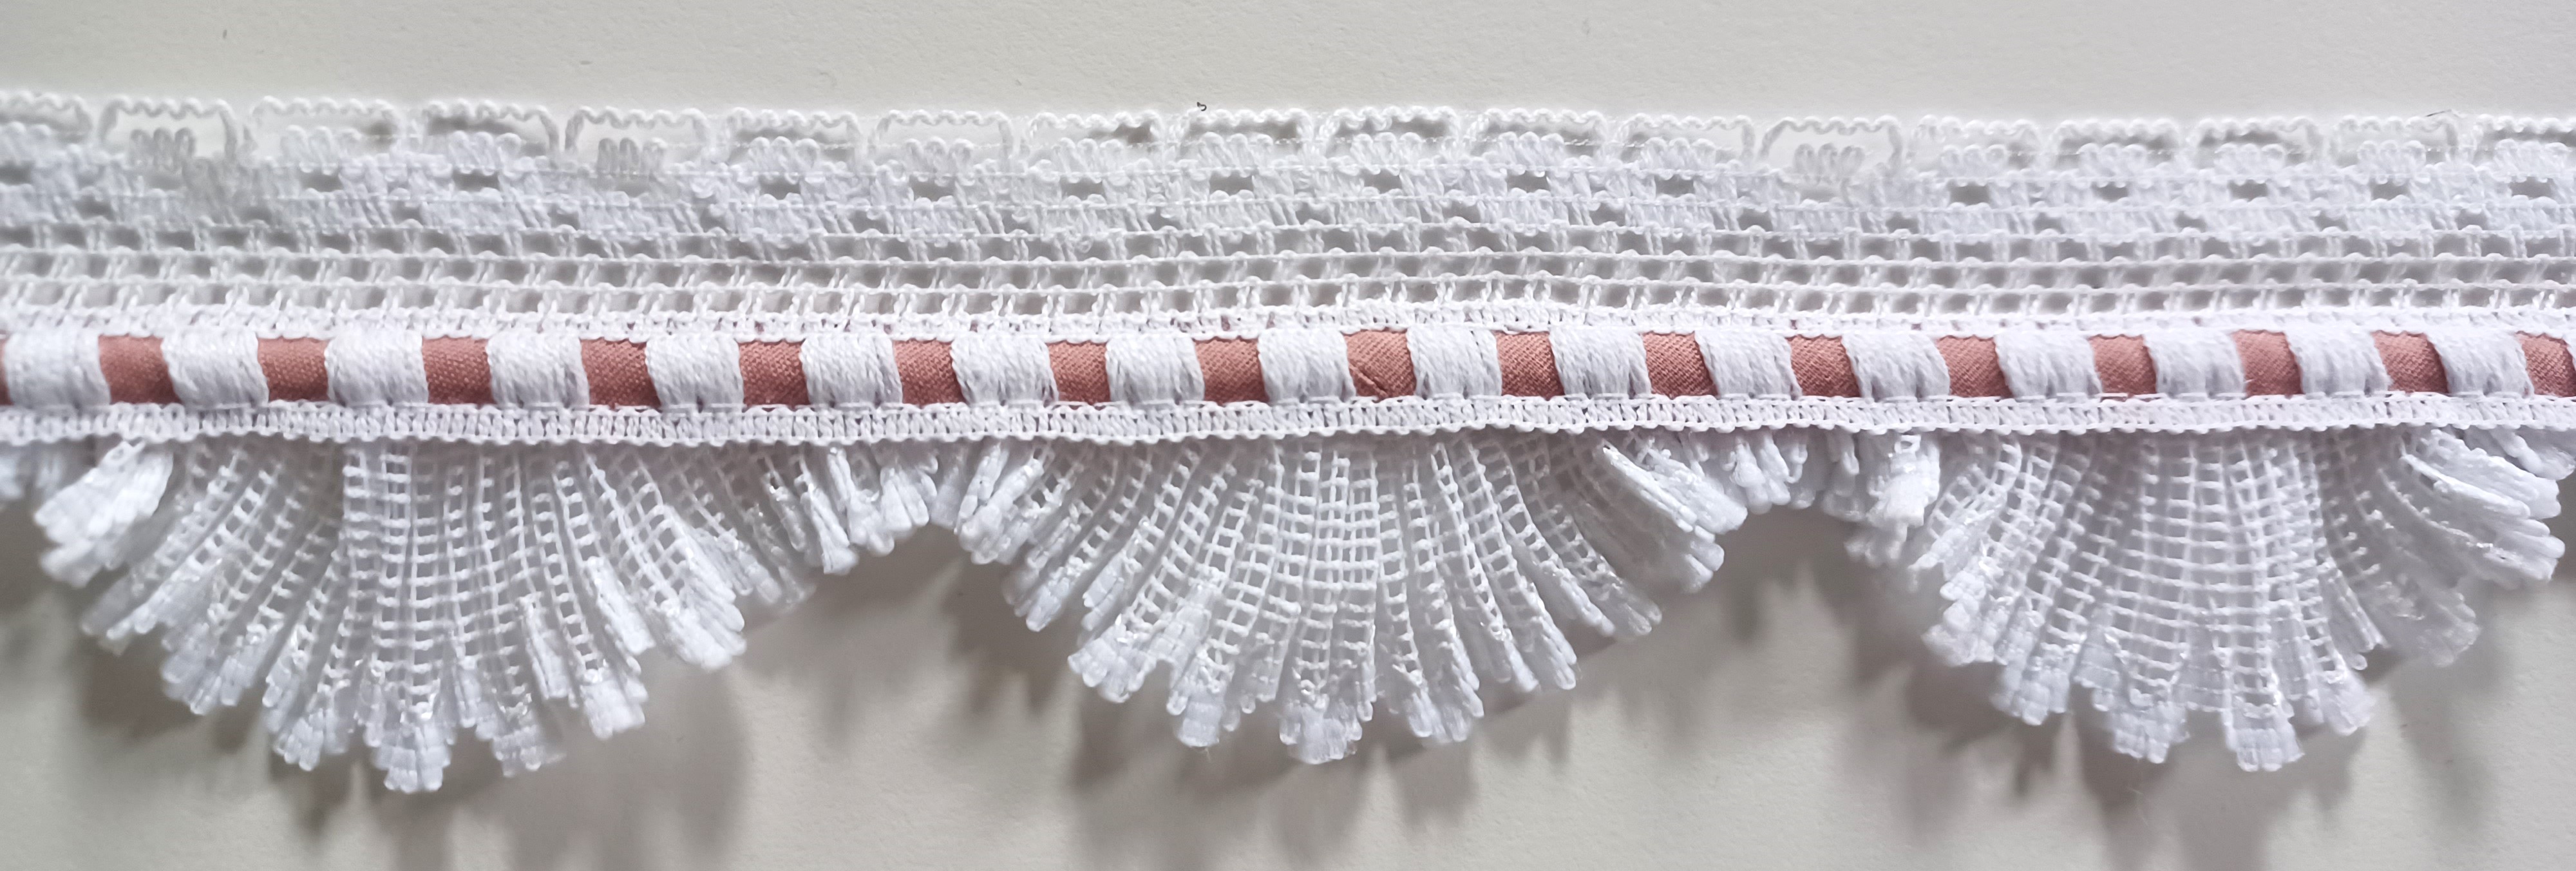 White/Dusty Rose 2 1/4" Pleated Scallop